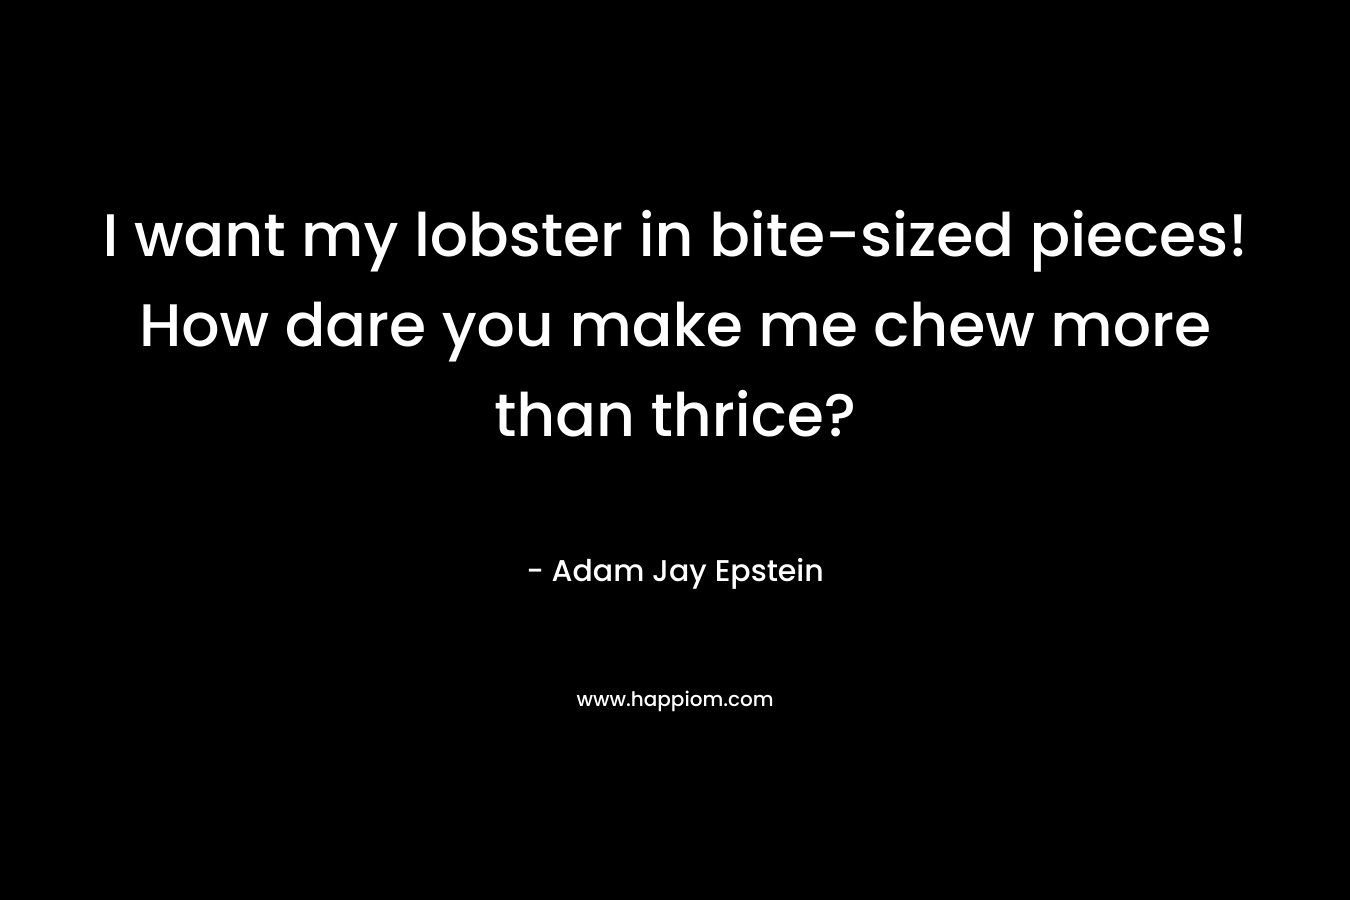 I want my lobster in bite-sized pieces! How dare you make me chew more than thrice? – Adam Jay Epstein